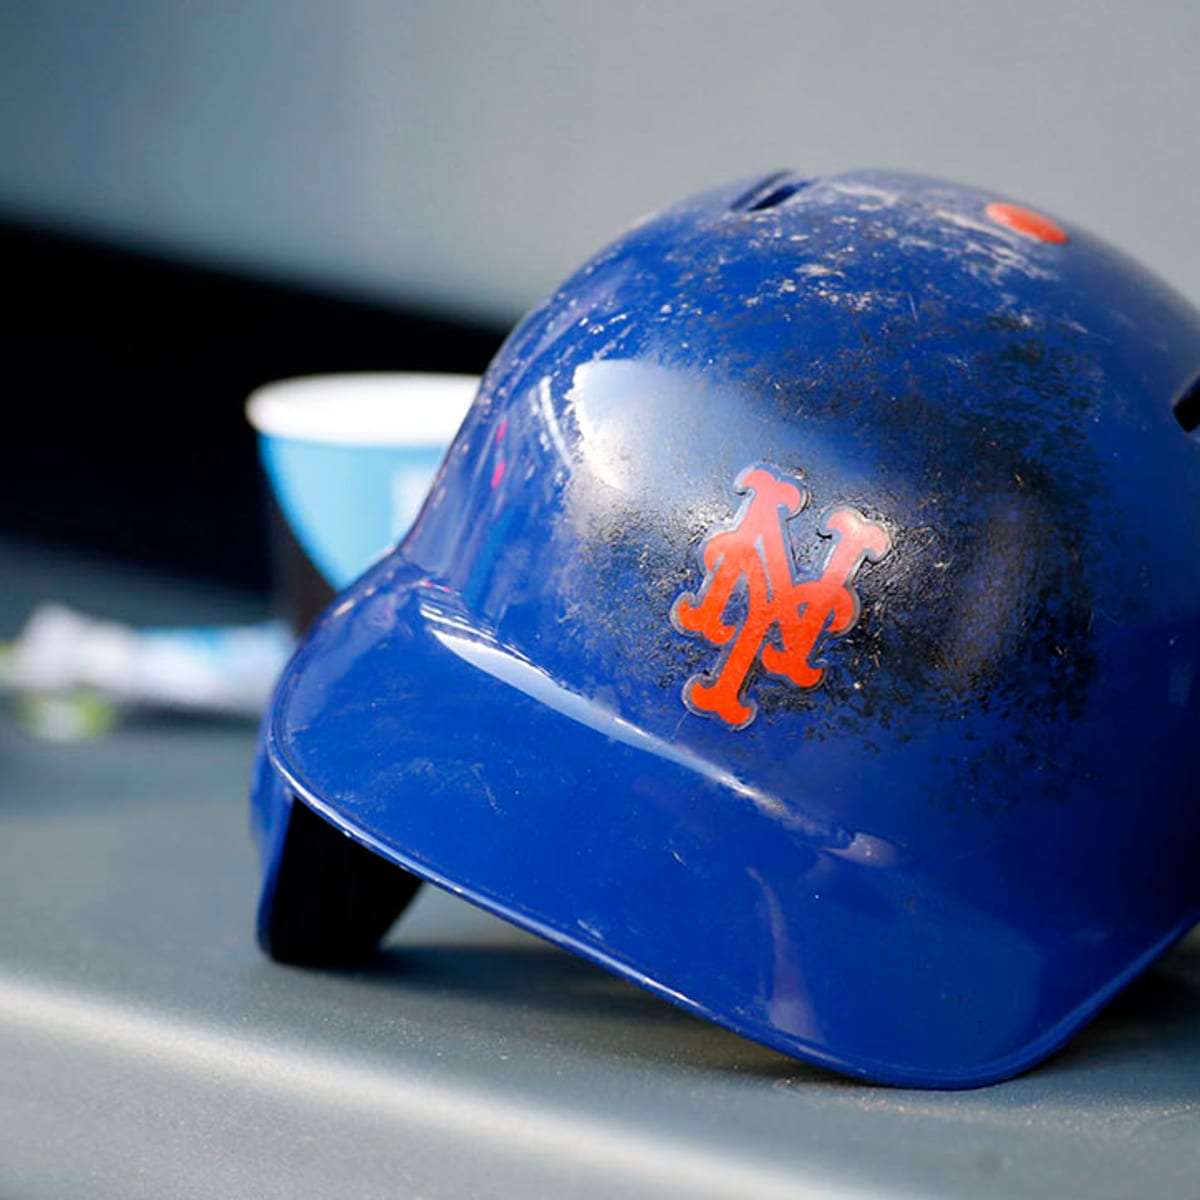 NY Mets Rumors: What will it take to outbid the Rockies for